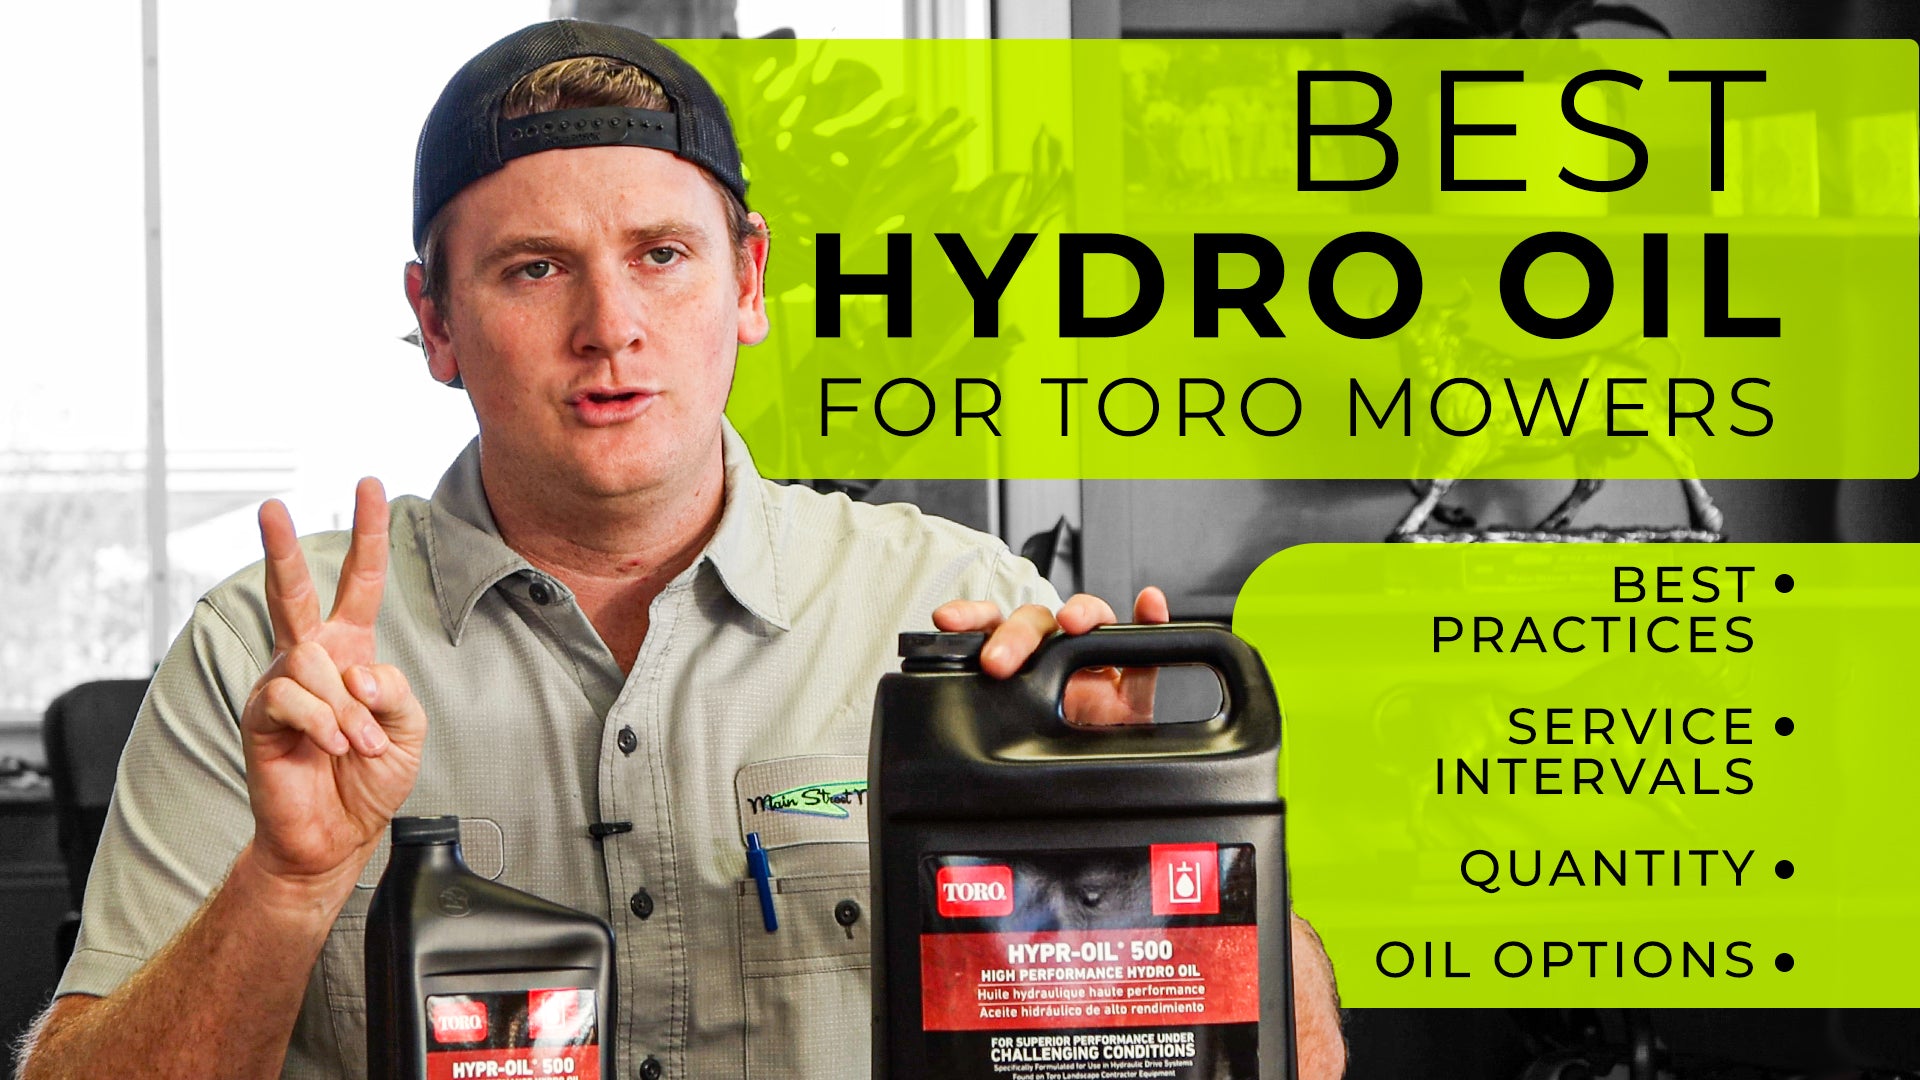 Find the perfect hydro oil for your Toro mower! Detailed guide on types, quantities & how to service your mower efficiently.